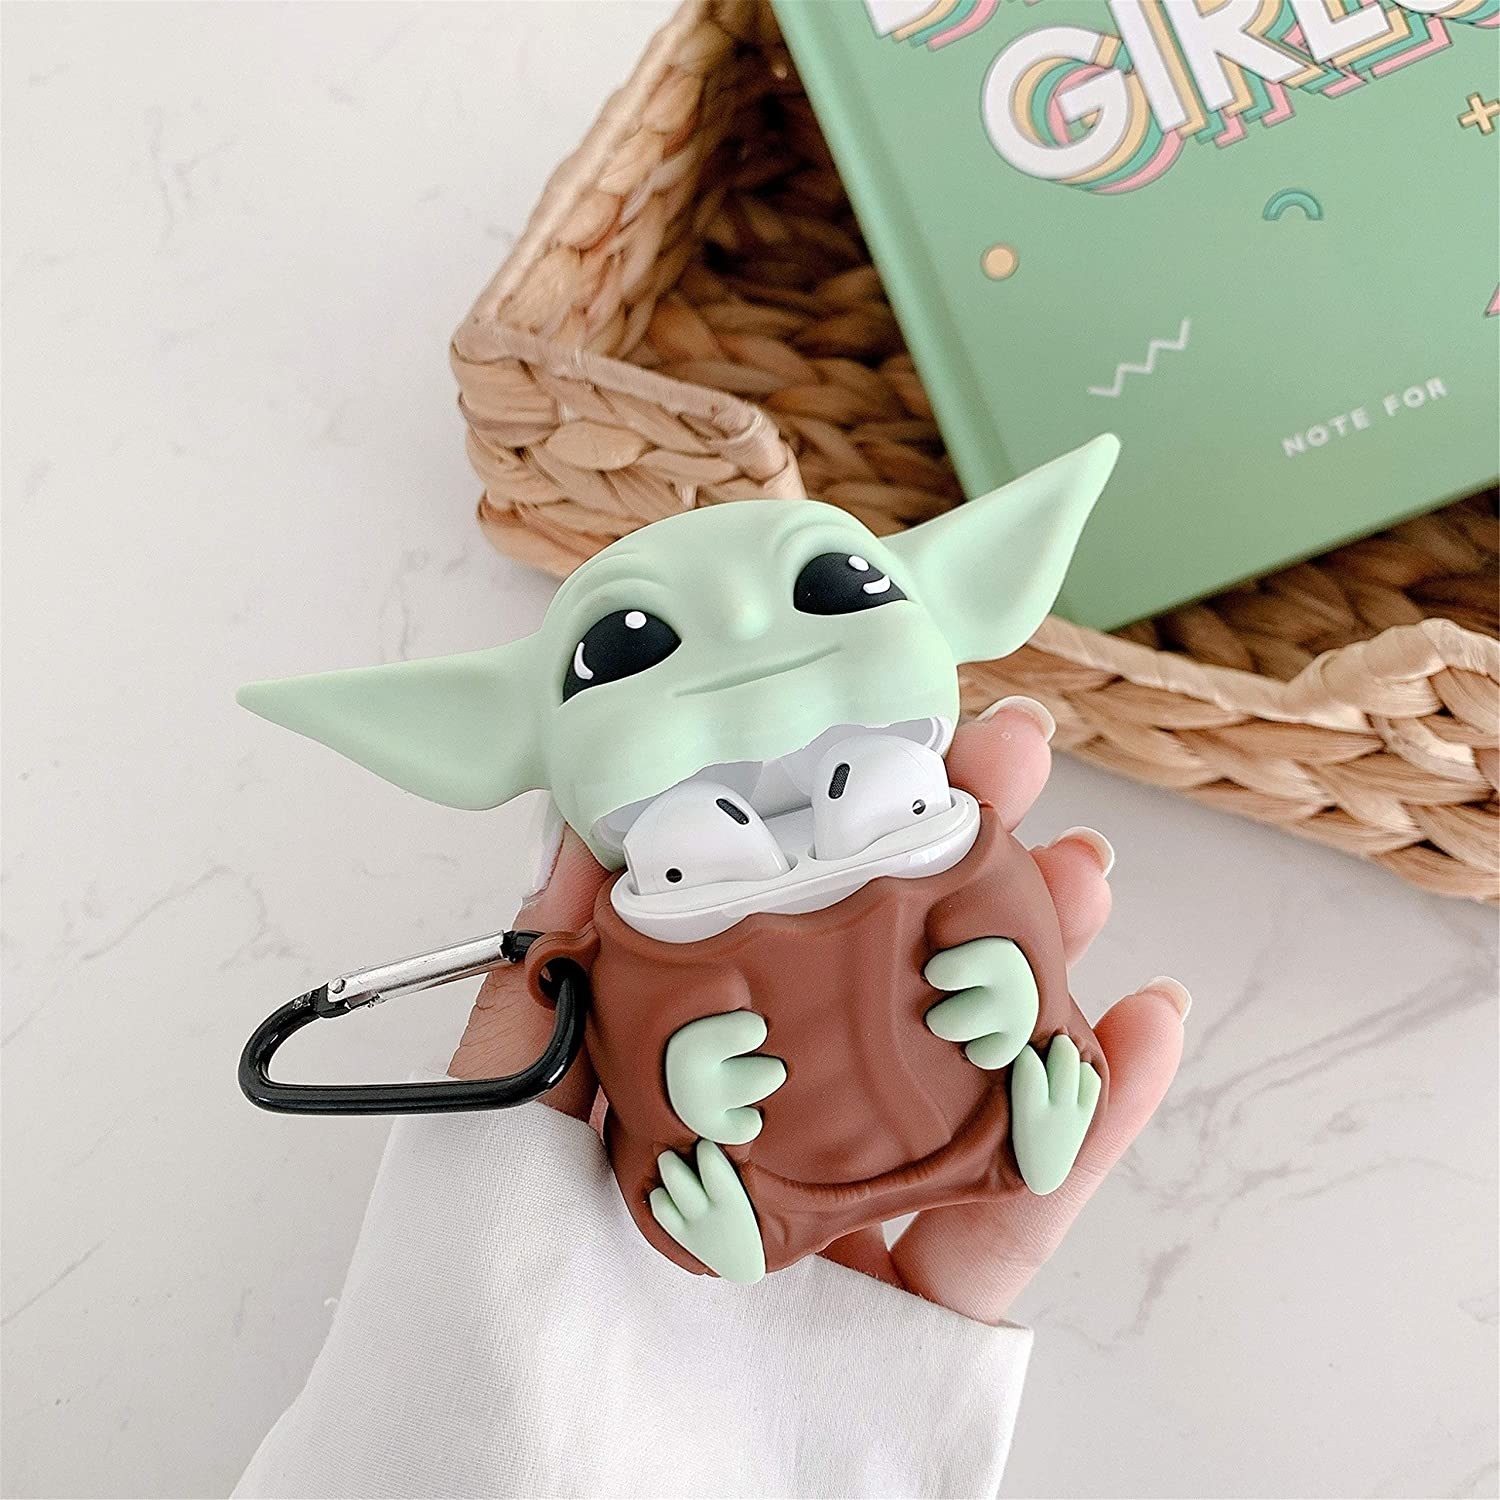 An Airpods case with a silicone skin over it that looks like Baby Yoda